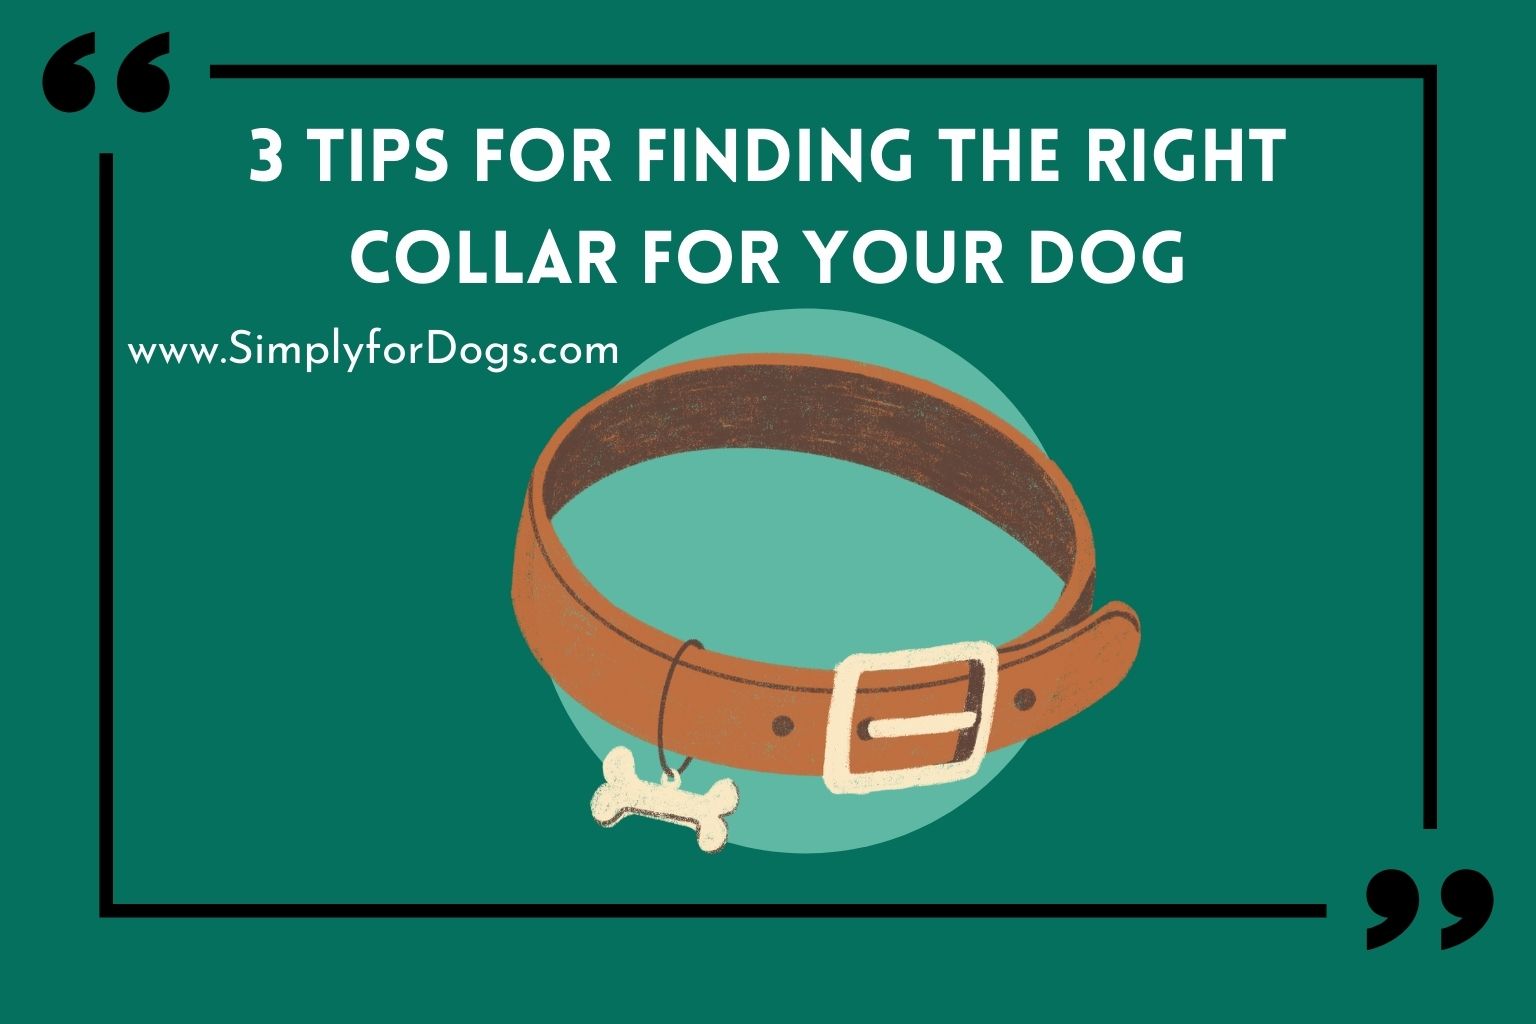 3 Tips for Finding the Right Collar for Your Dog